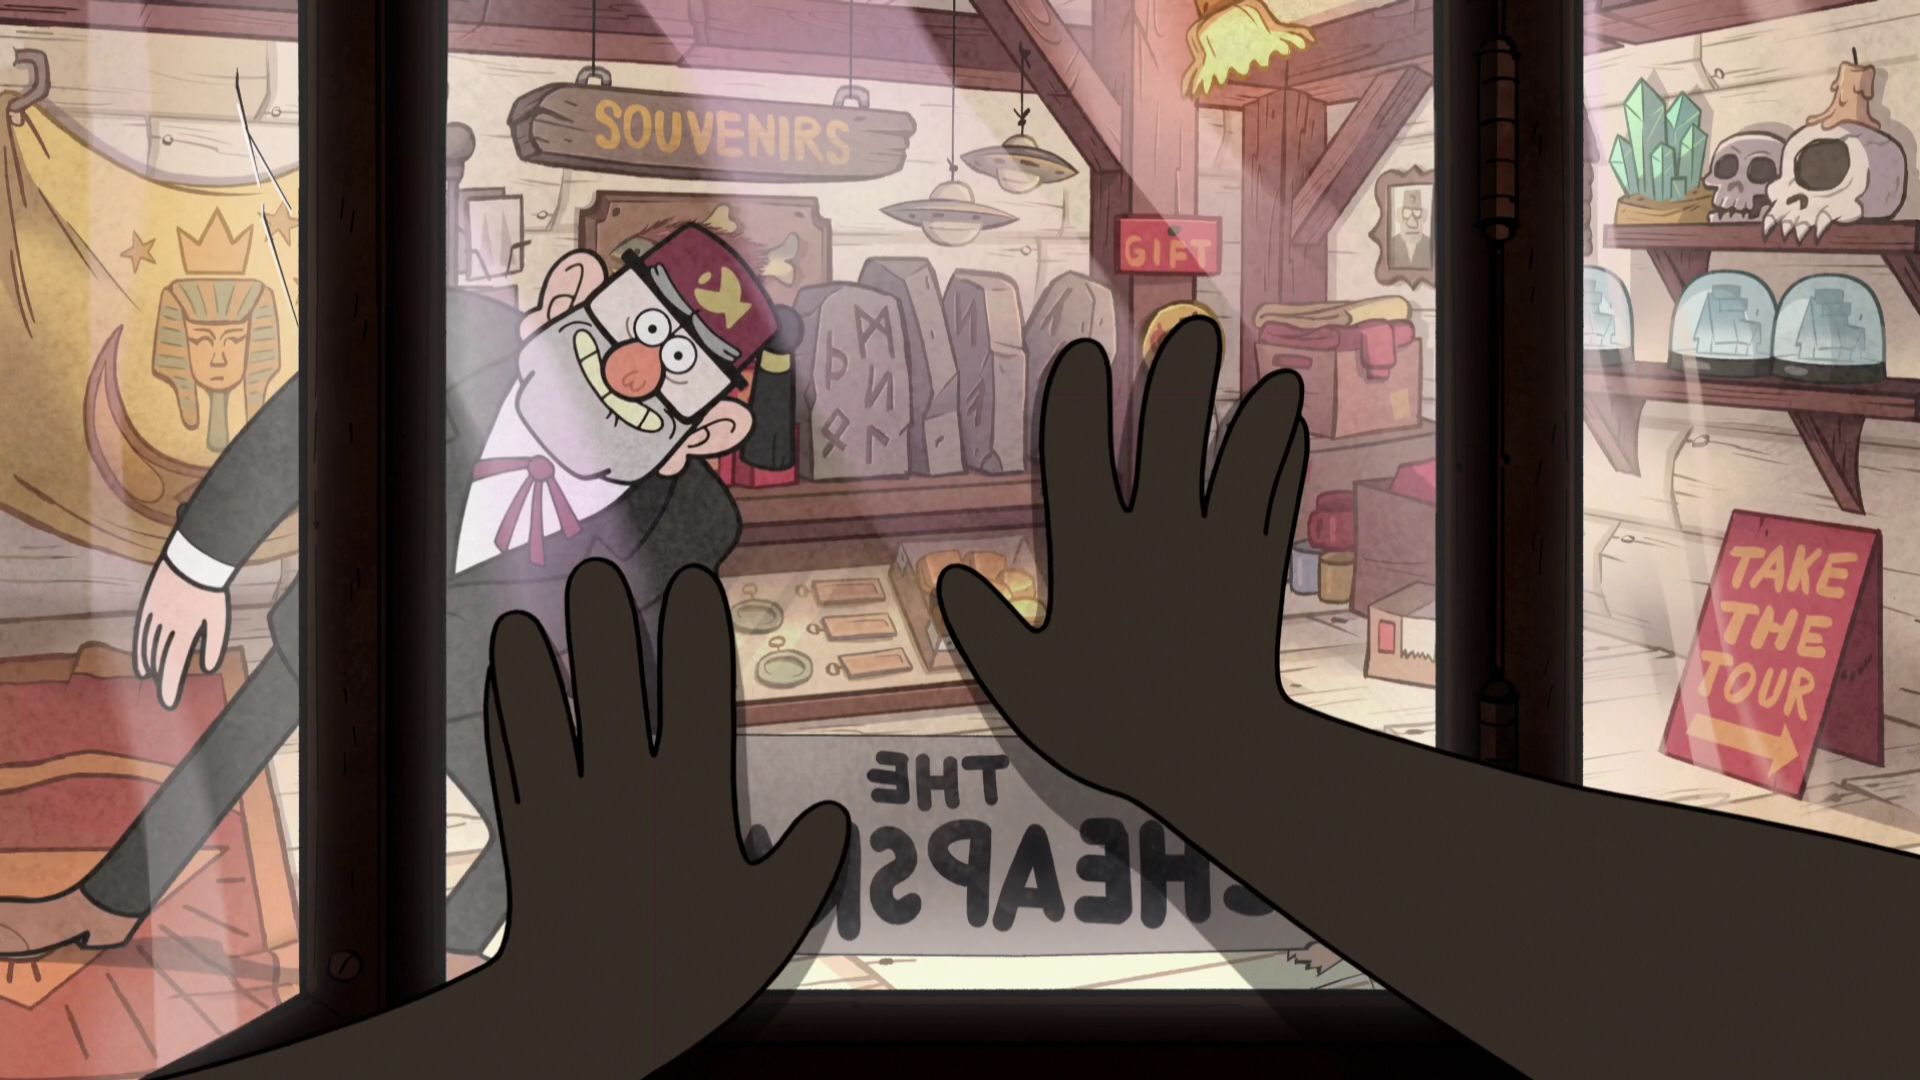 Killing A Main Character In Gravity Falls Was Never On The Table